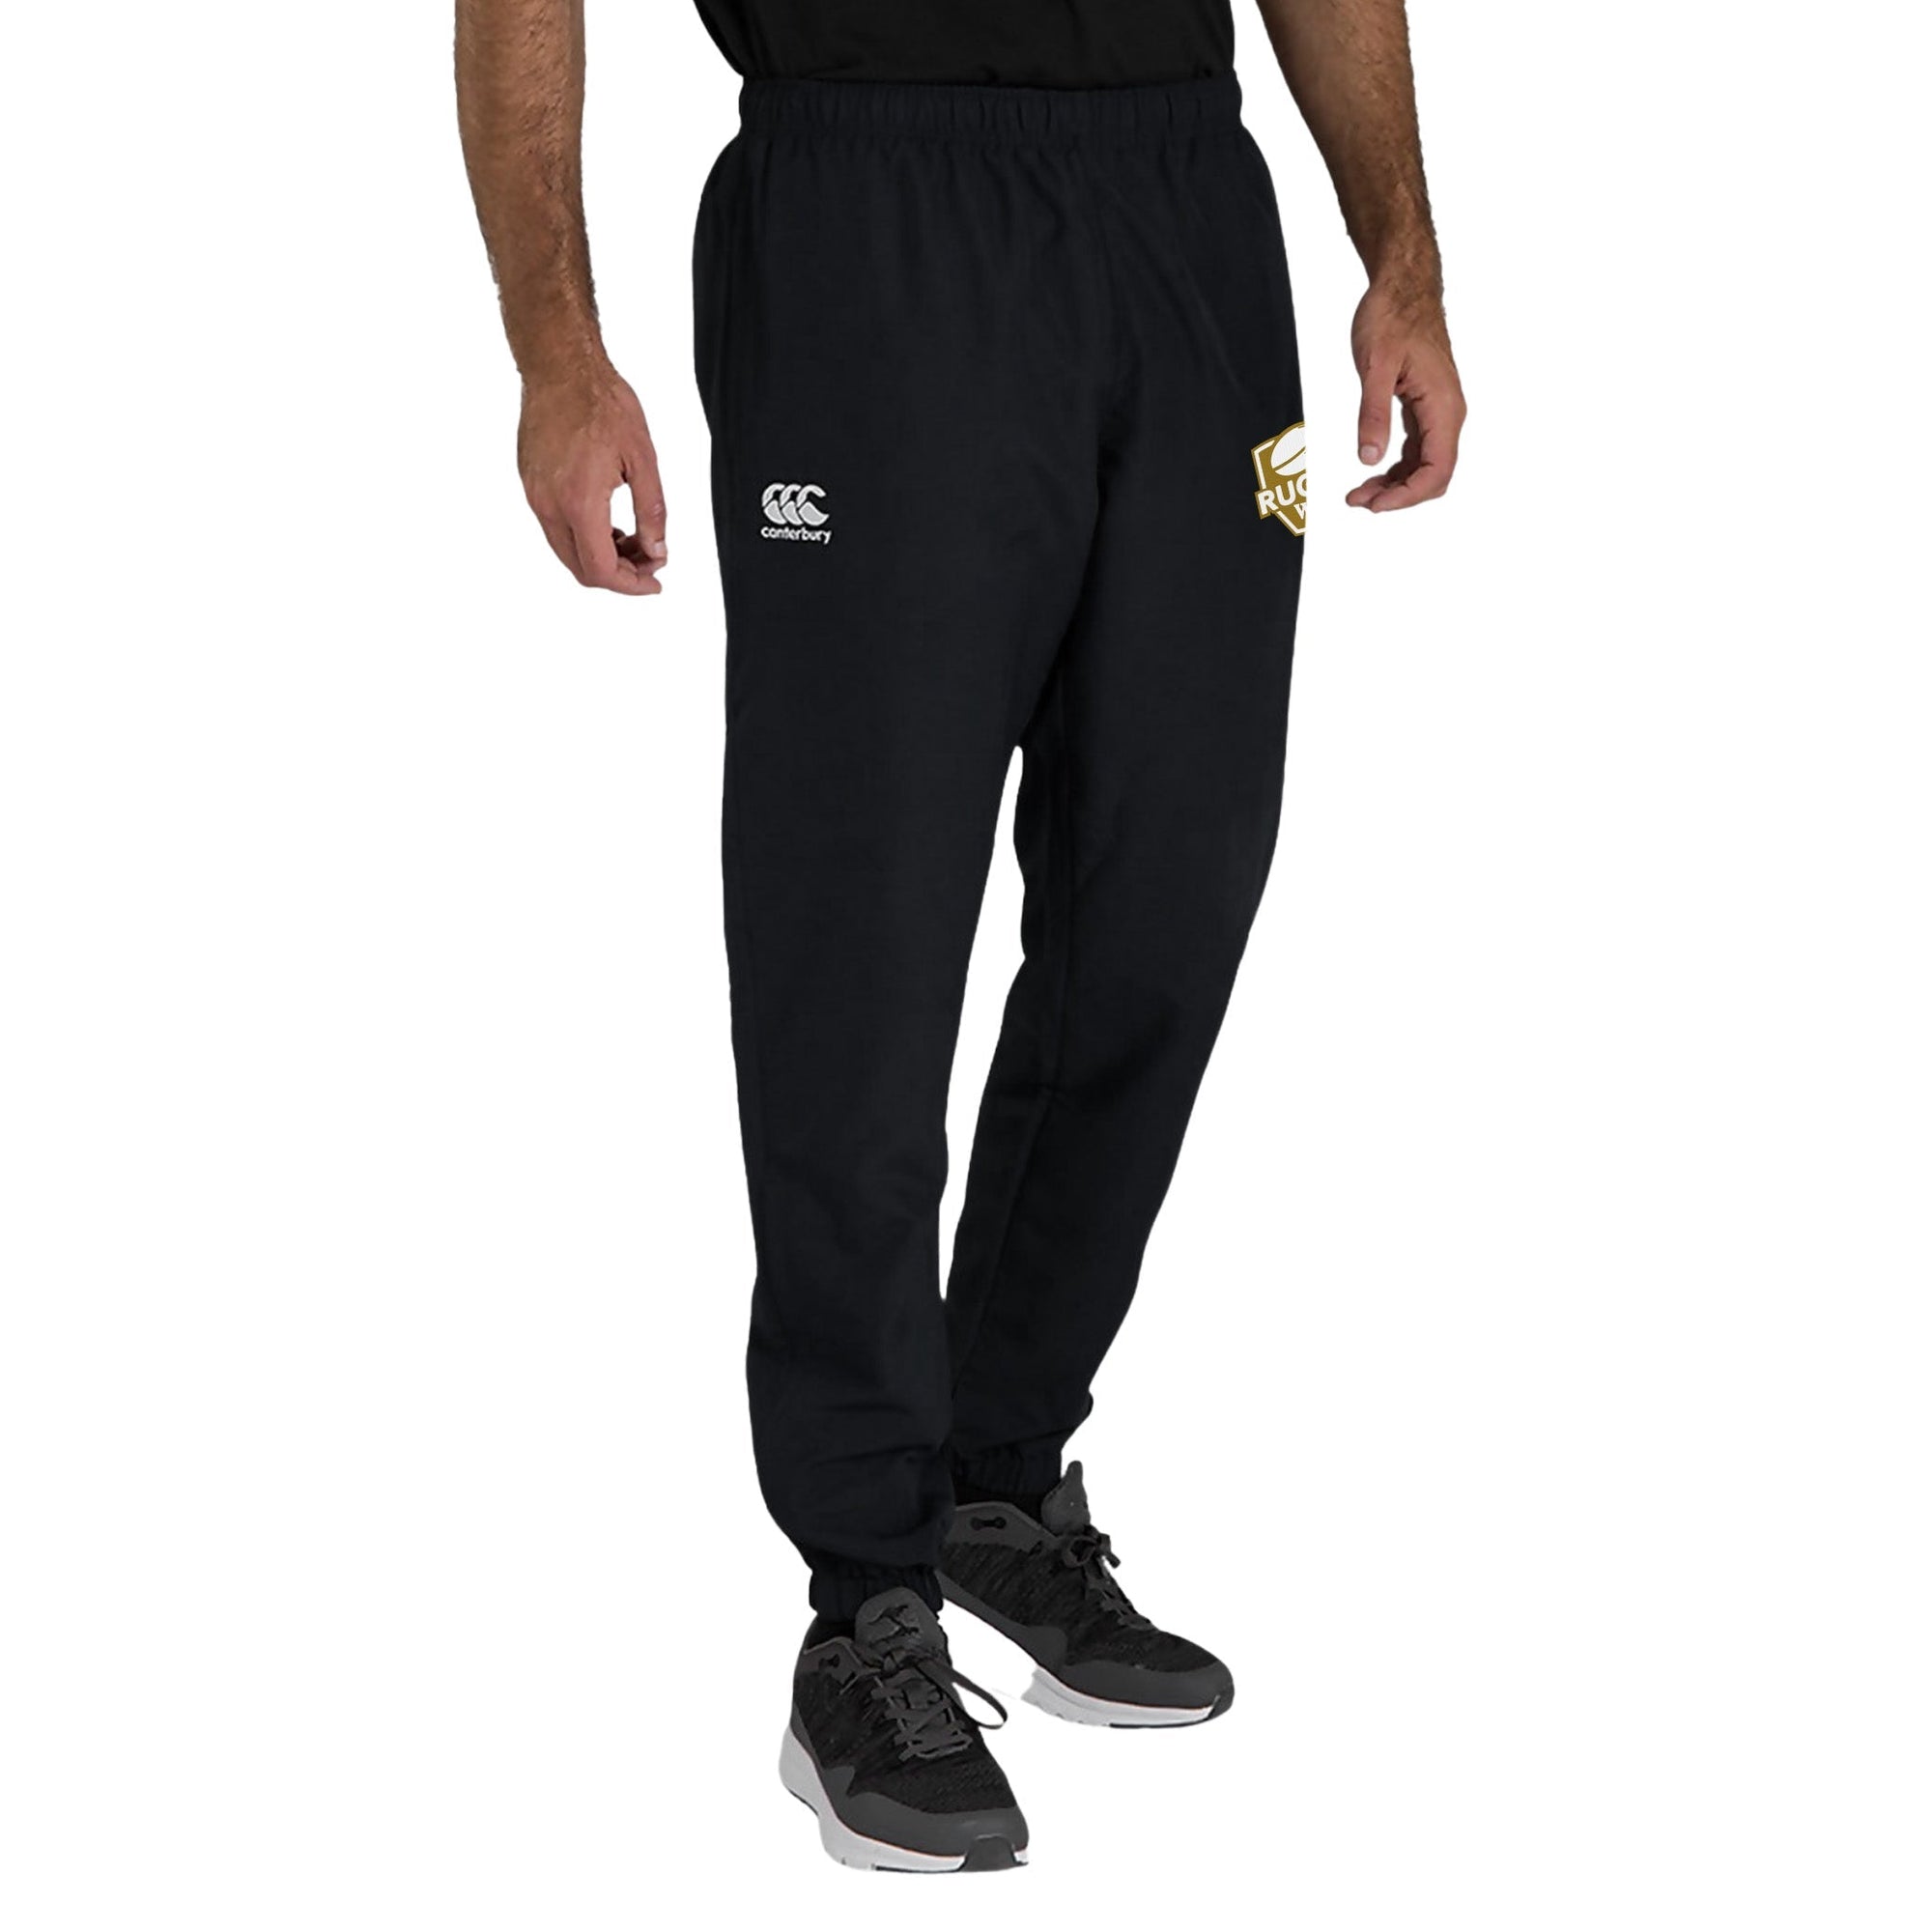 Rugby Imports Wake Forest CCC Track Pant